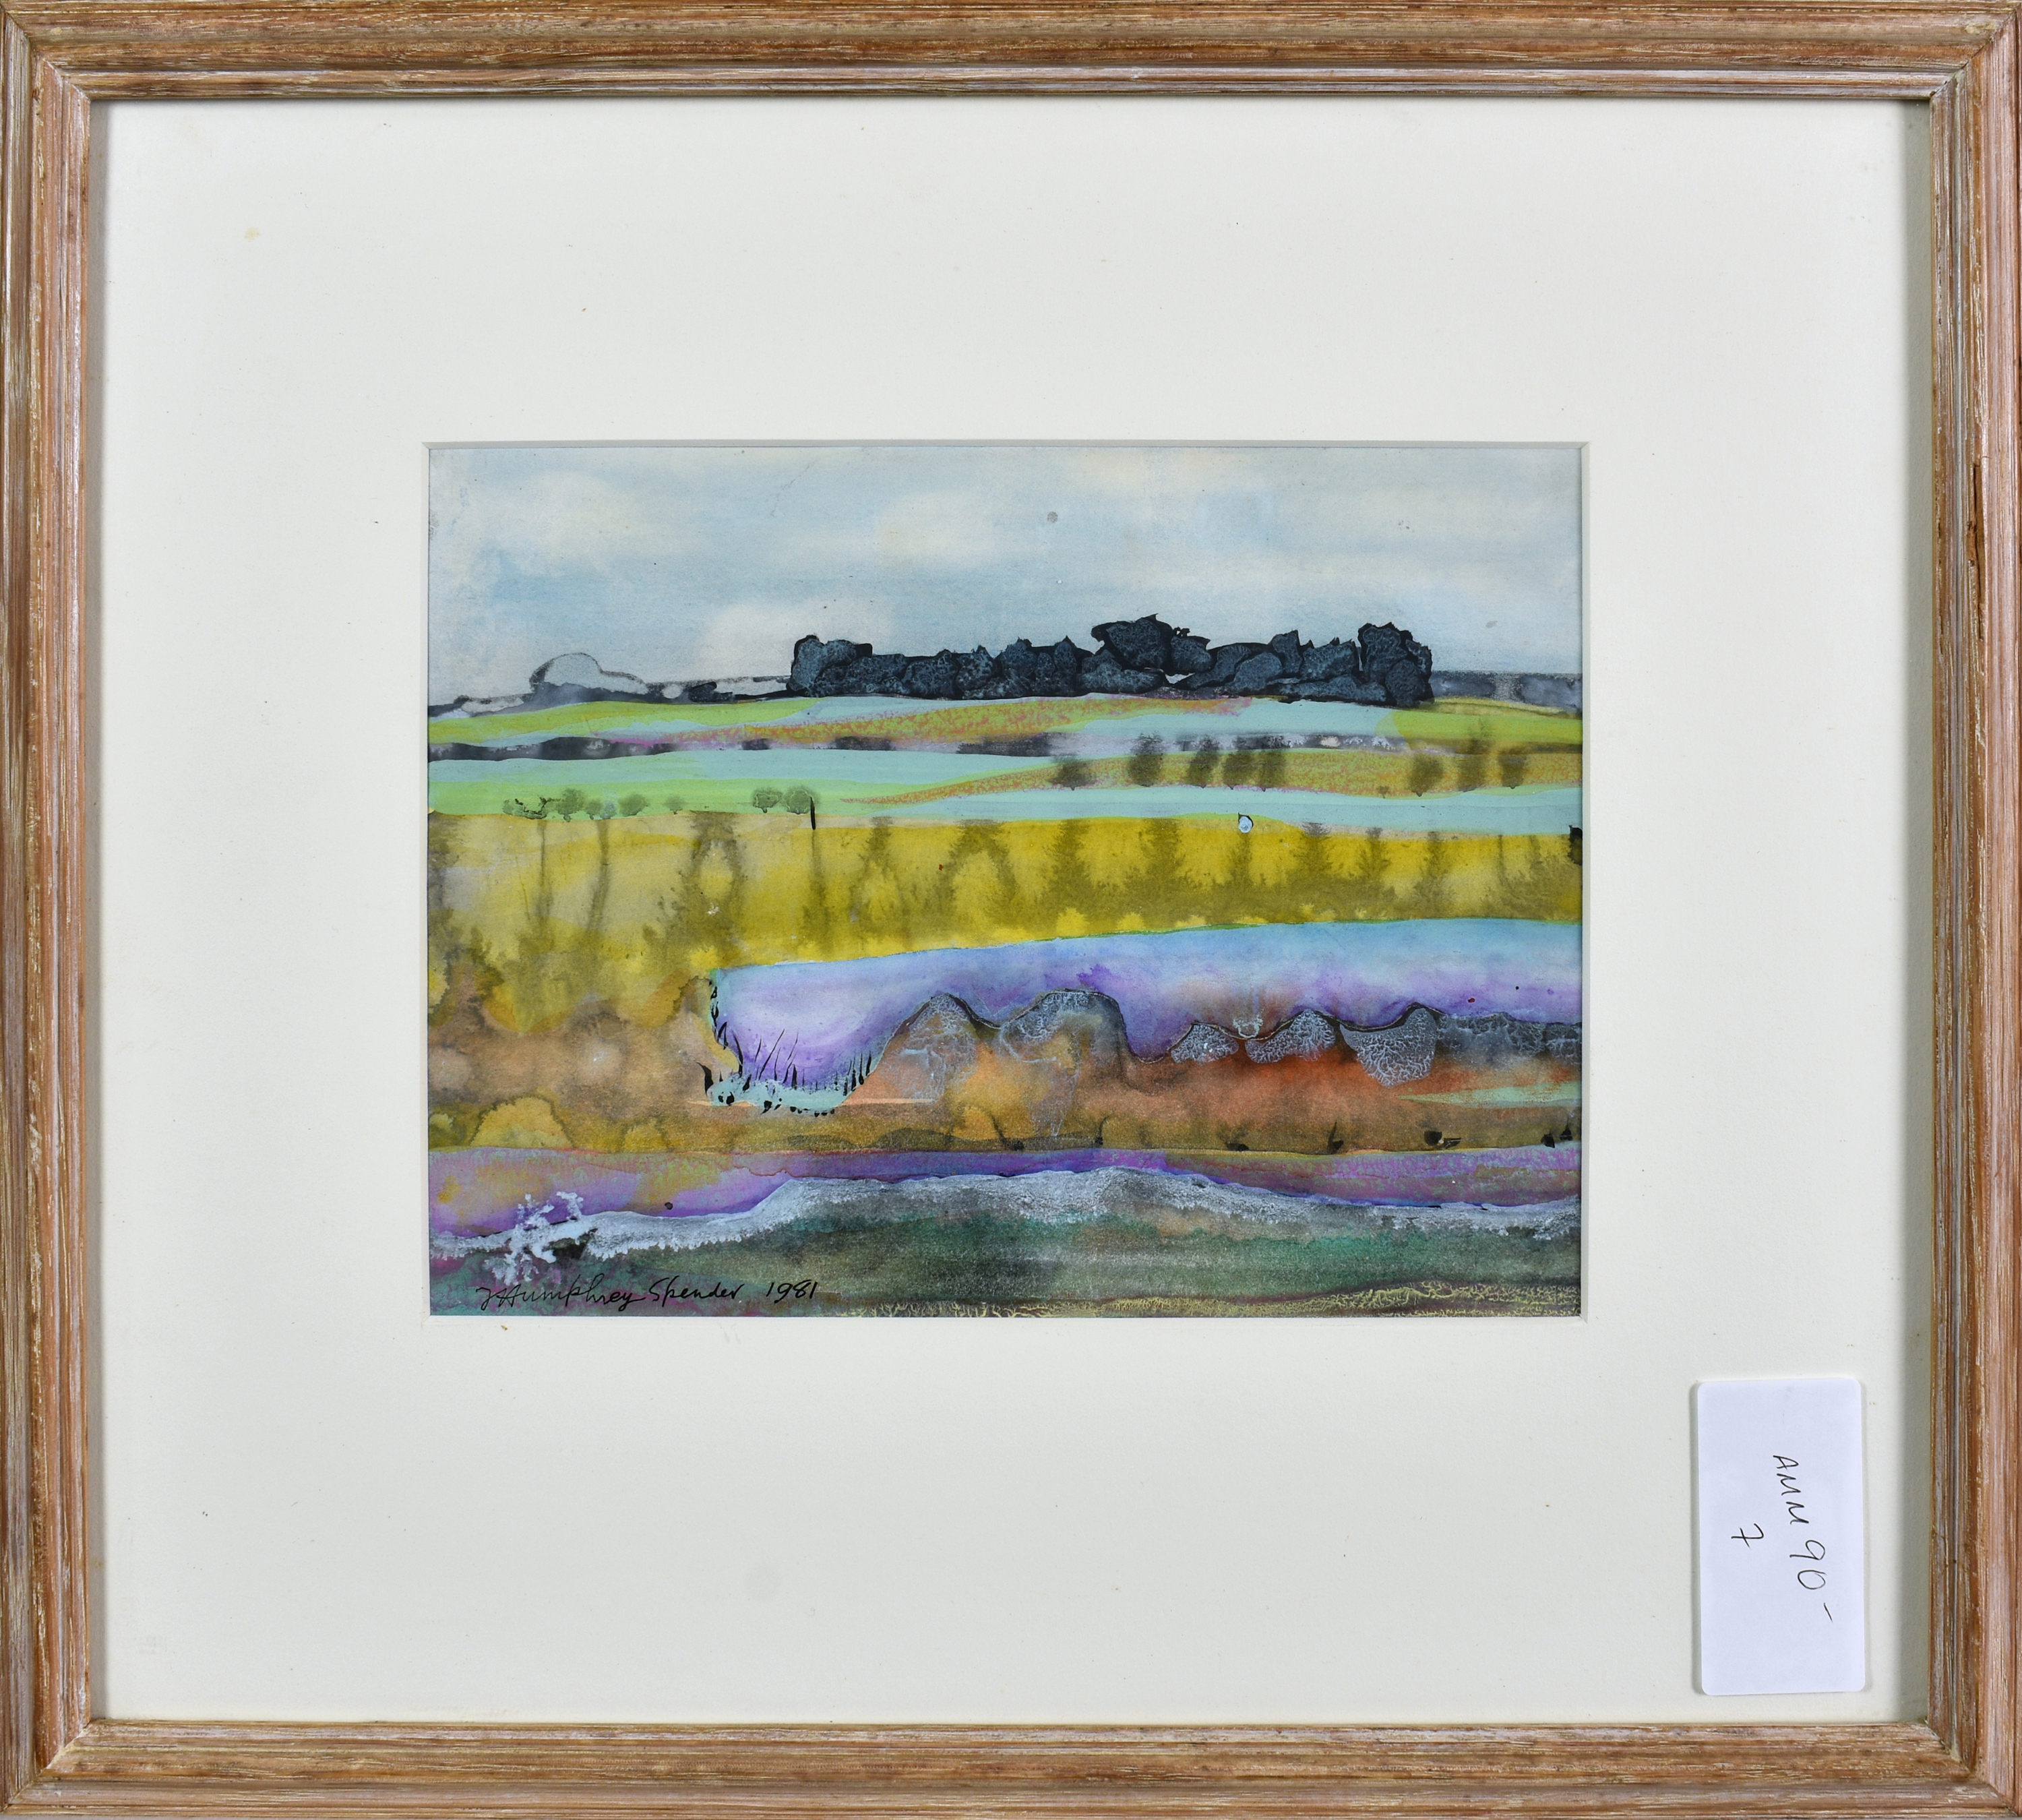 John Humphrey Spender (British, 1910-2005), "Essex Fields" watercolour and ink. inscribed on - Image 2 of 3